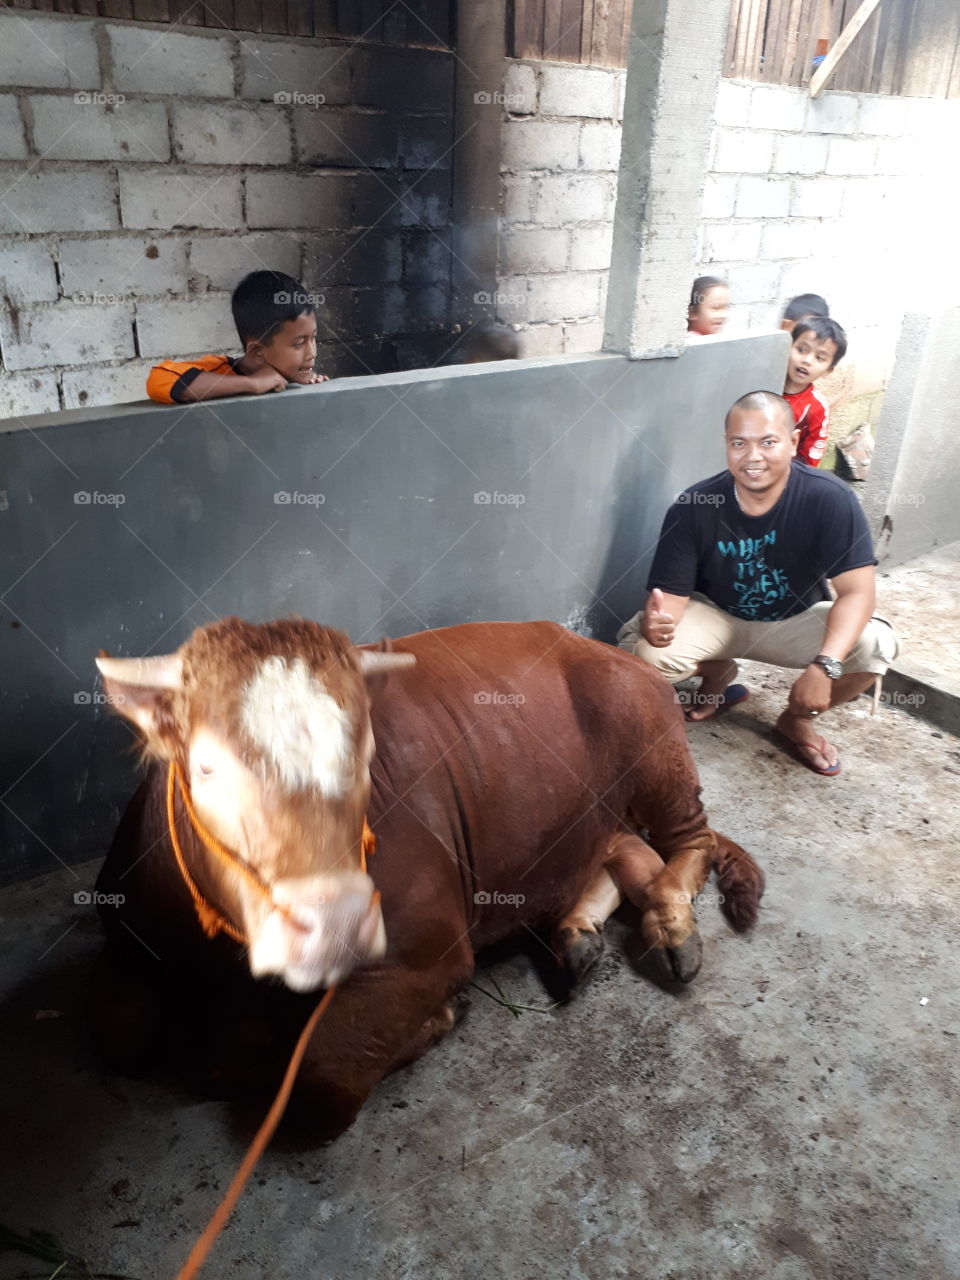 My First Cow